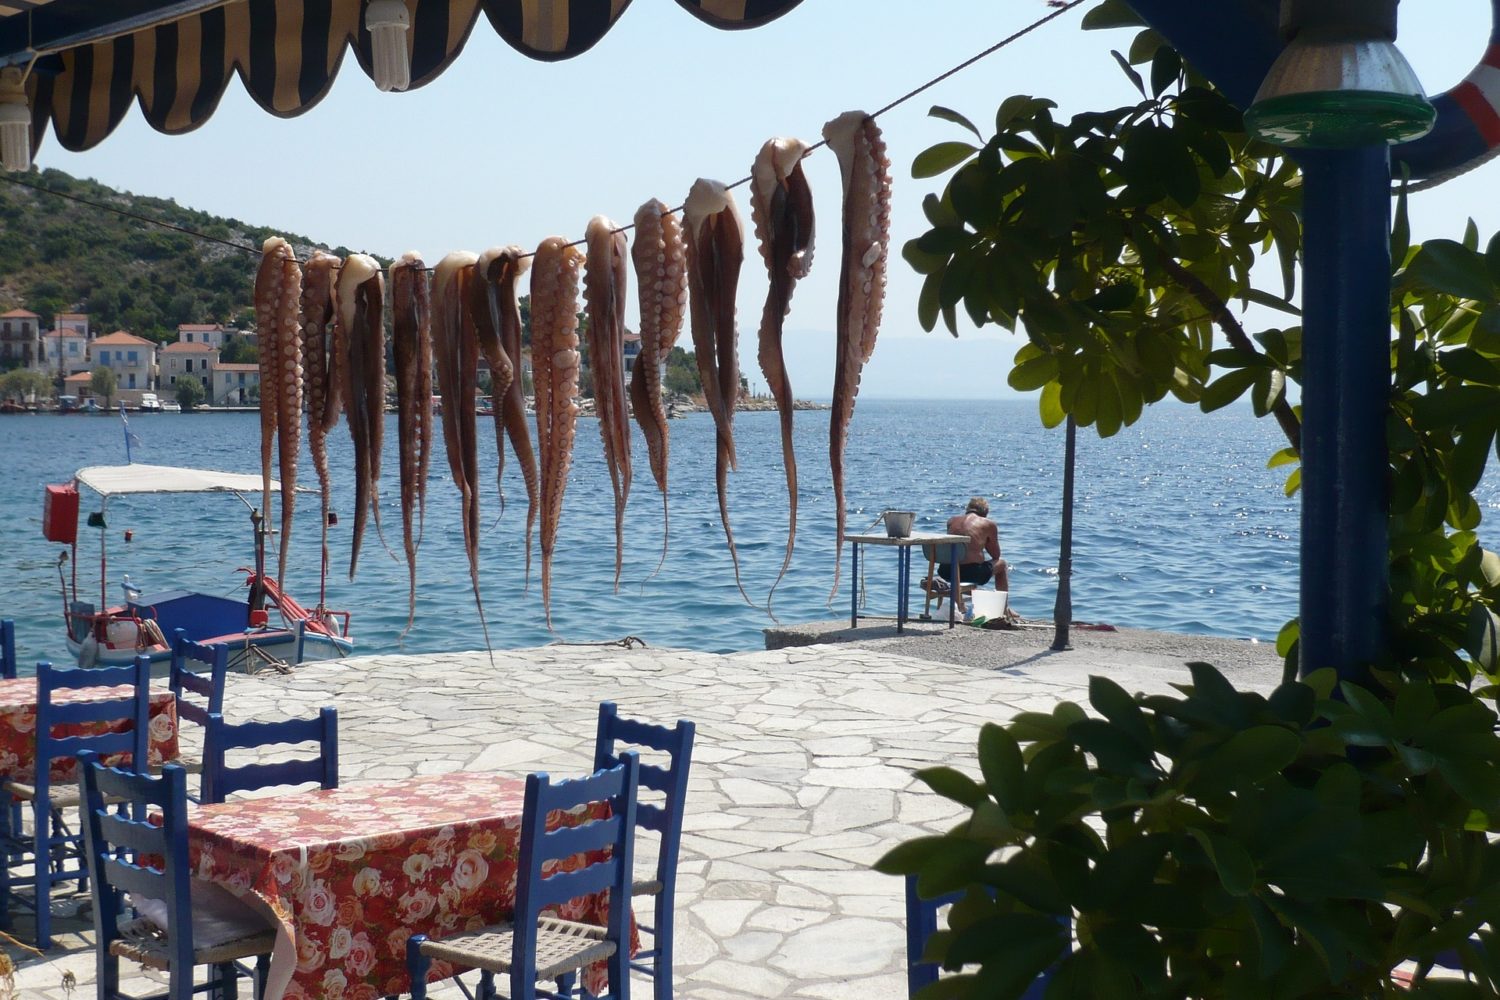 Octopus drying is a common sight to see in Greece!